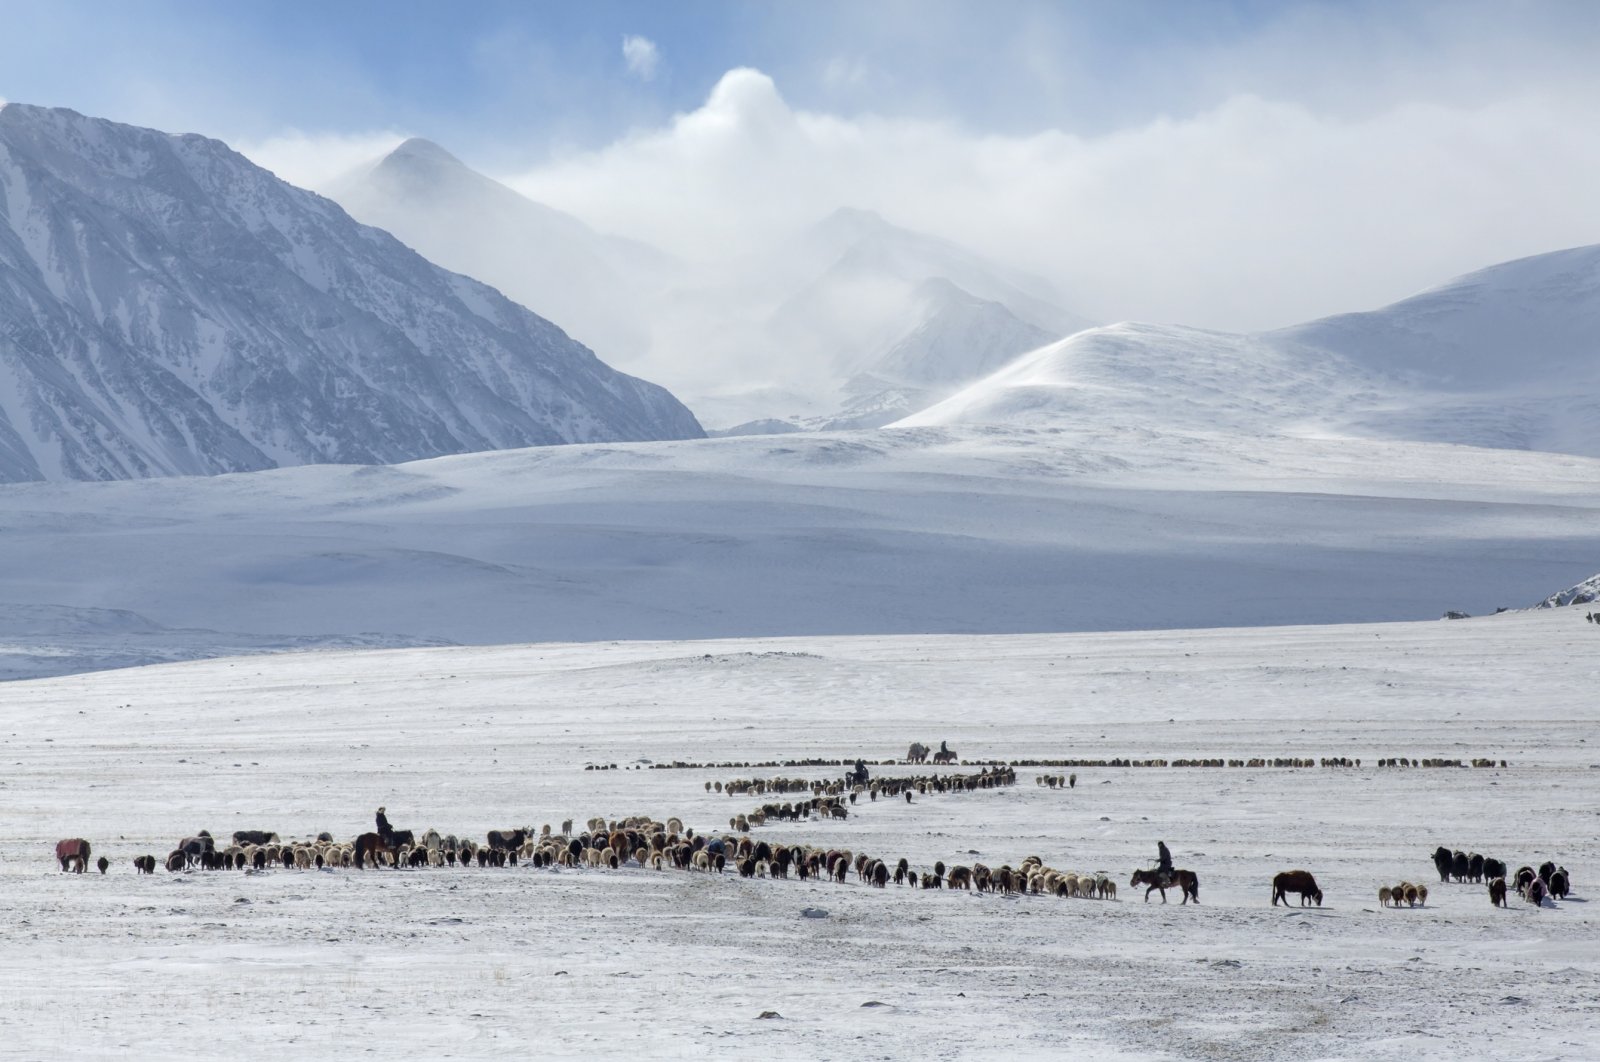 &quot;Between February and April, Kazakh nomads in western Mongolia migrate 150 kilometers across the Altai Mountains due to weather, accompanied by their livestock, Bayan-Olgiy, Western Mongolia. (Getty Images Photo)